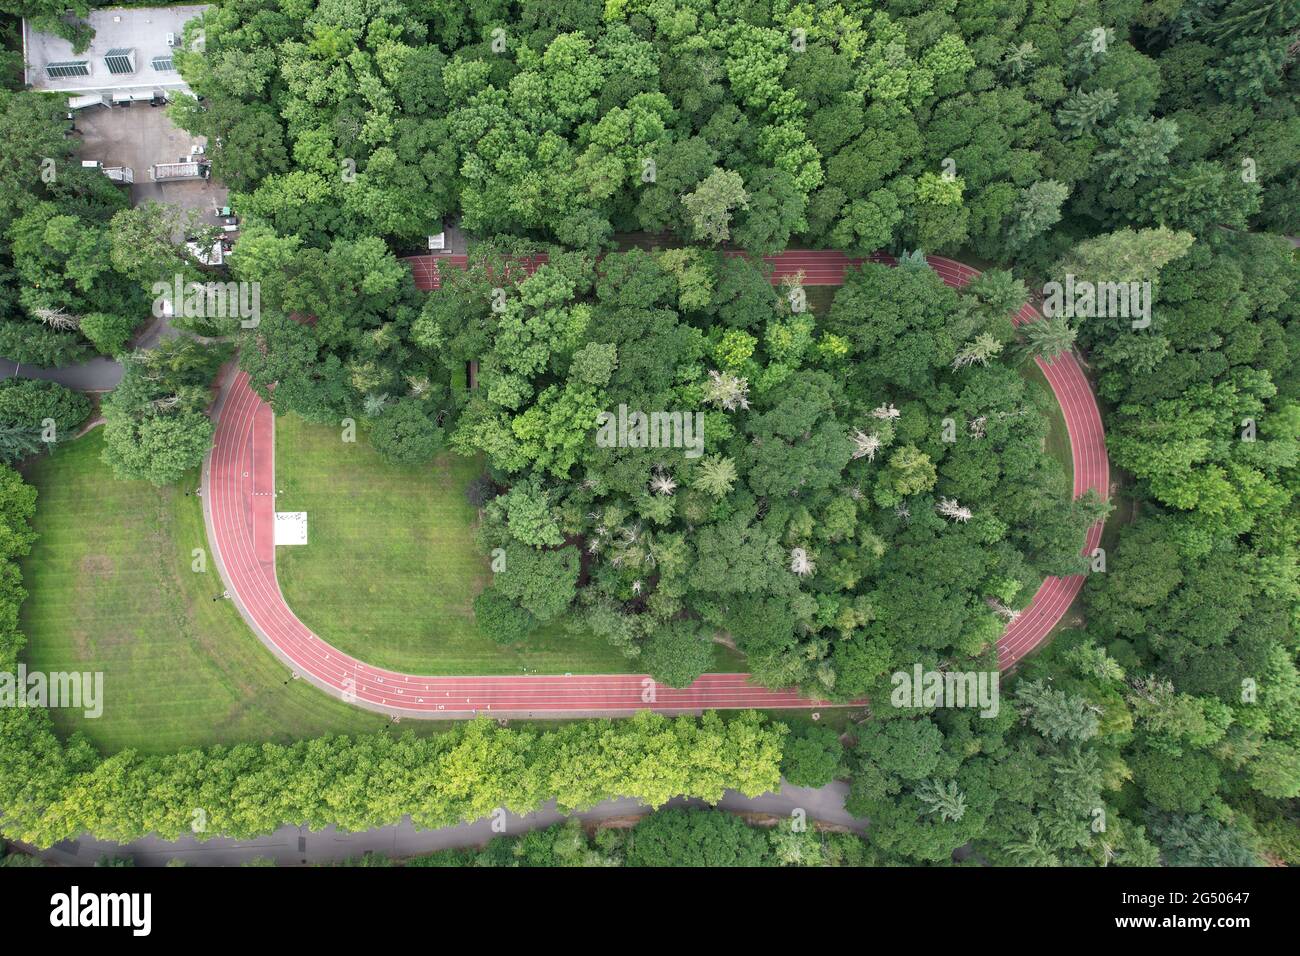 An aerial view of Michael Johnson track at the Nike World Headquarters,  Tuesday, June 22, 2021, in Beaverton, Ore. (Photo by Image of Sport/Sipa  USA Stock Photo - Alamy